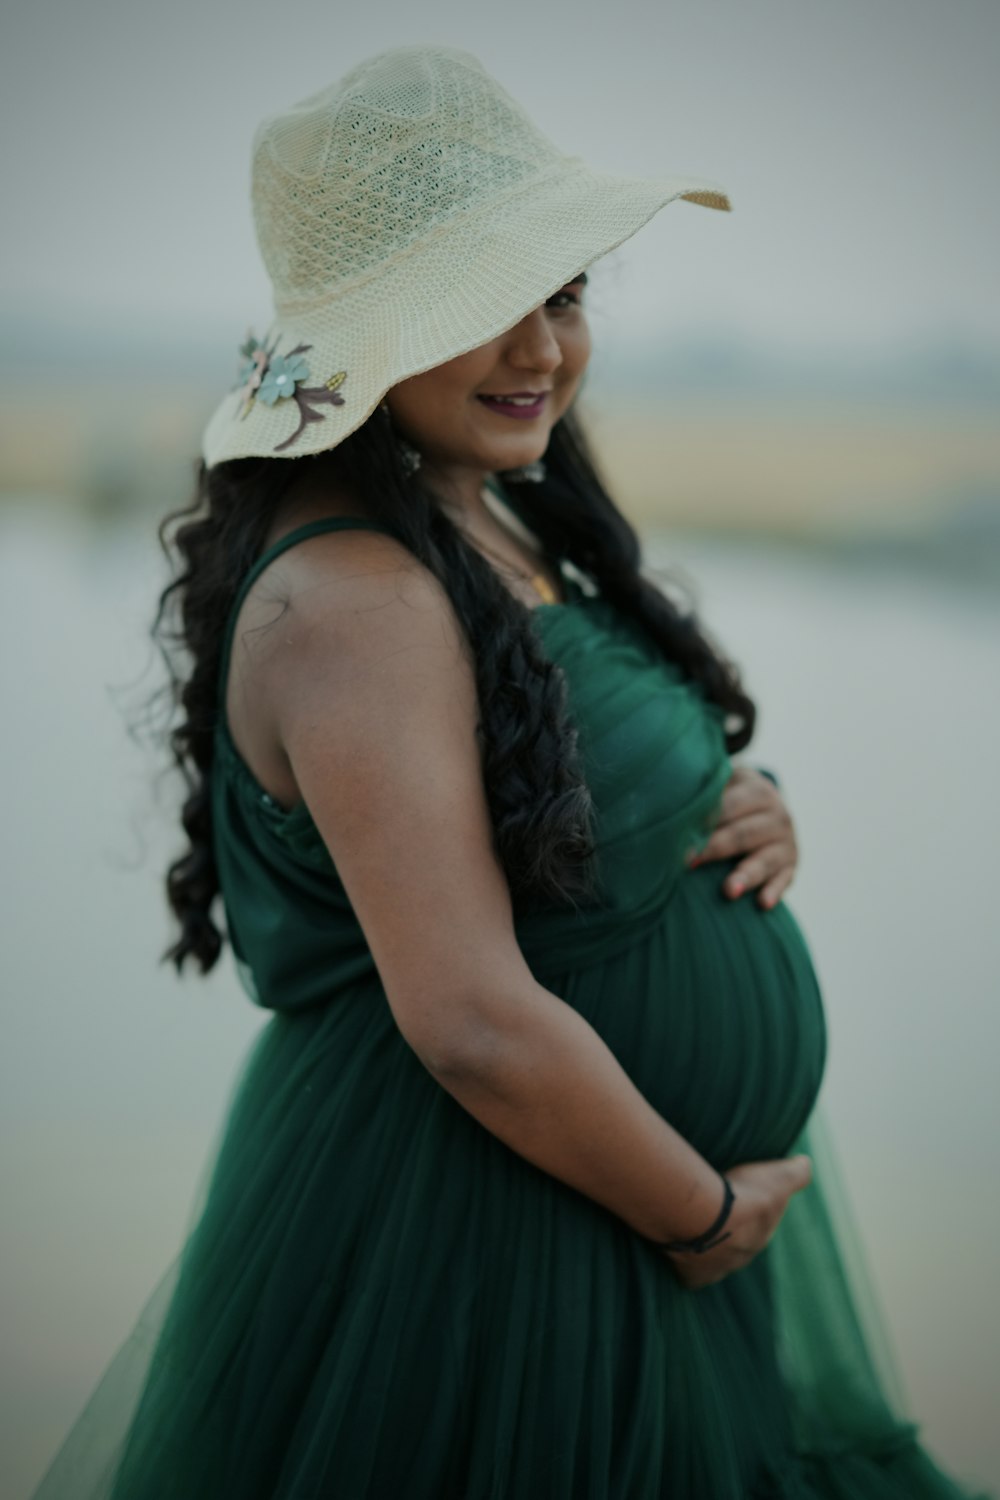 a pregnant woman wearing a green dress and a hat